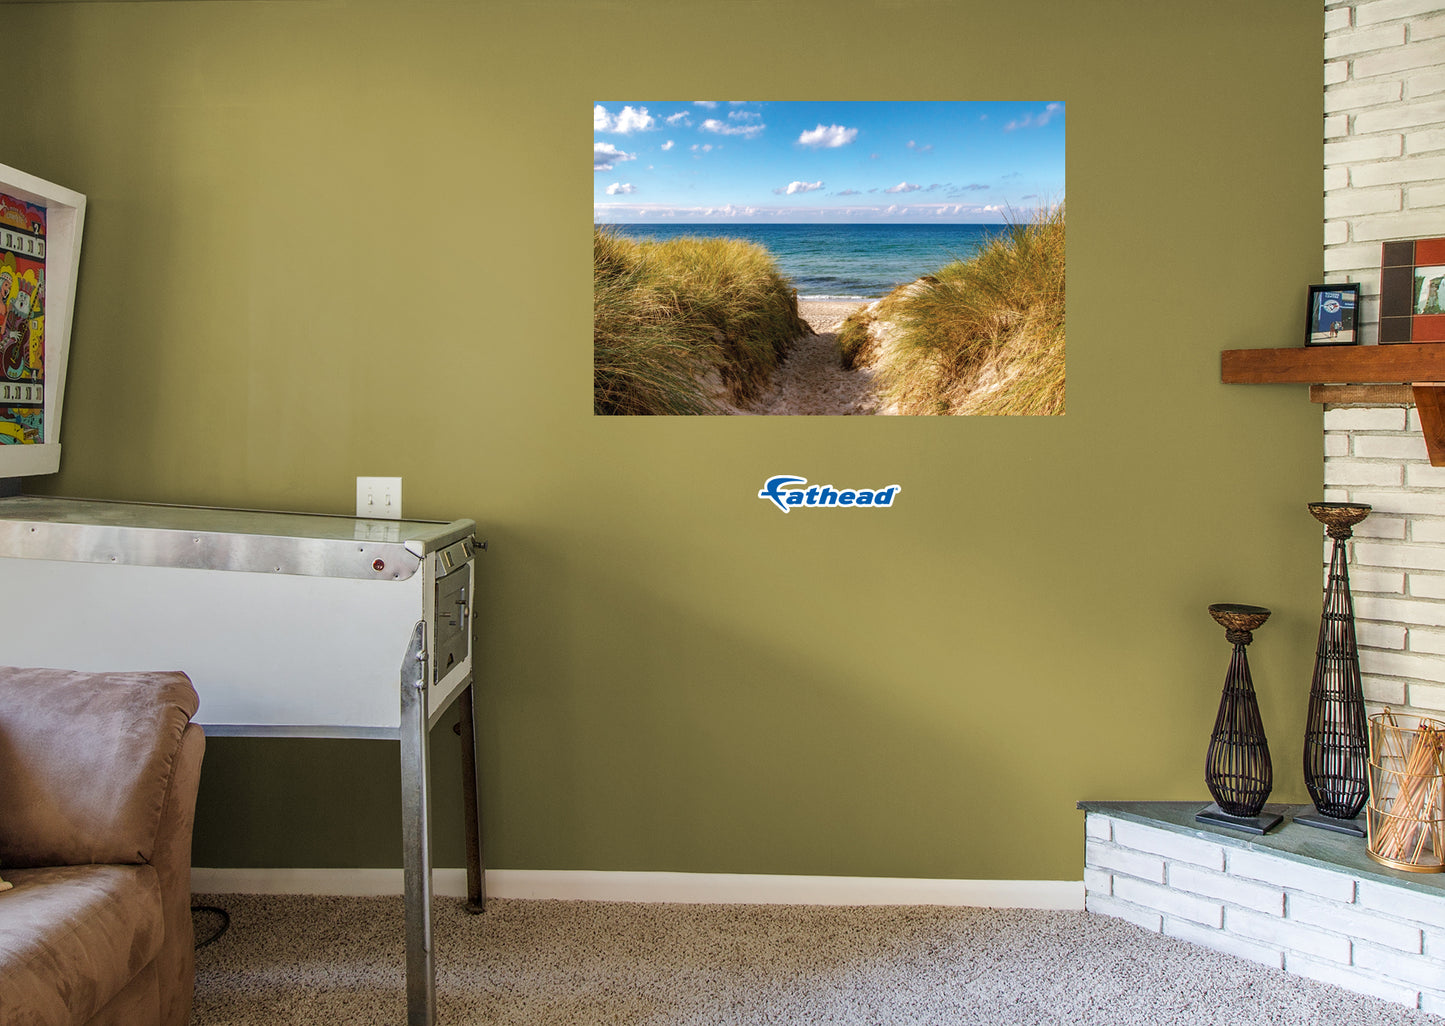 Generic Scenery:  Lost Poster        -   Removable     Adhesive Decal